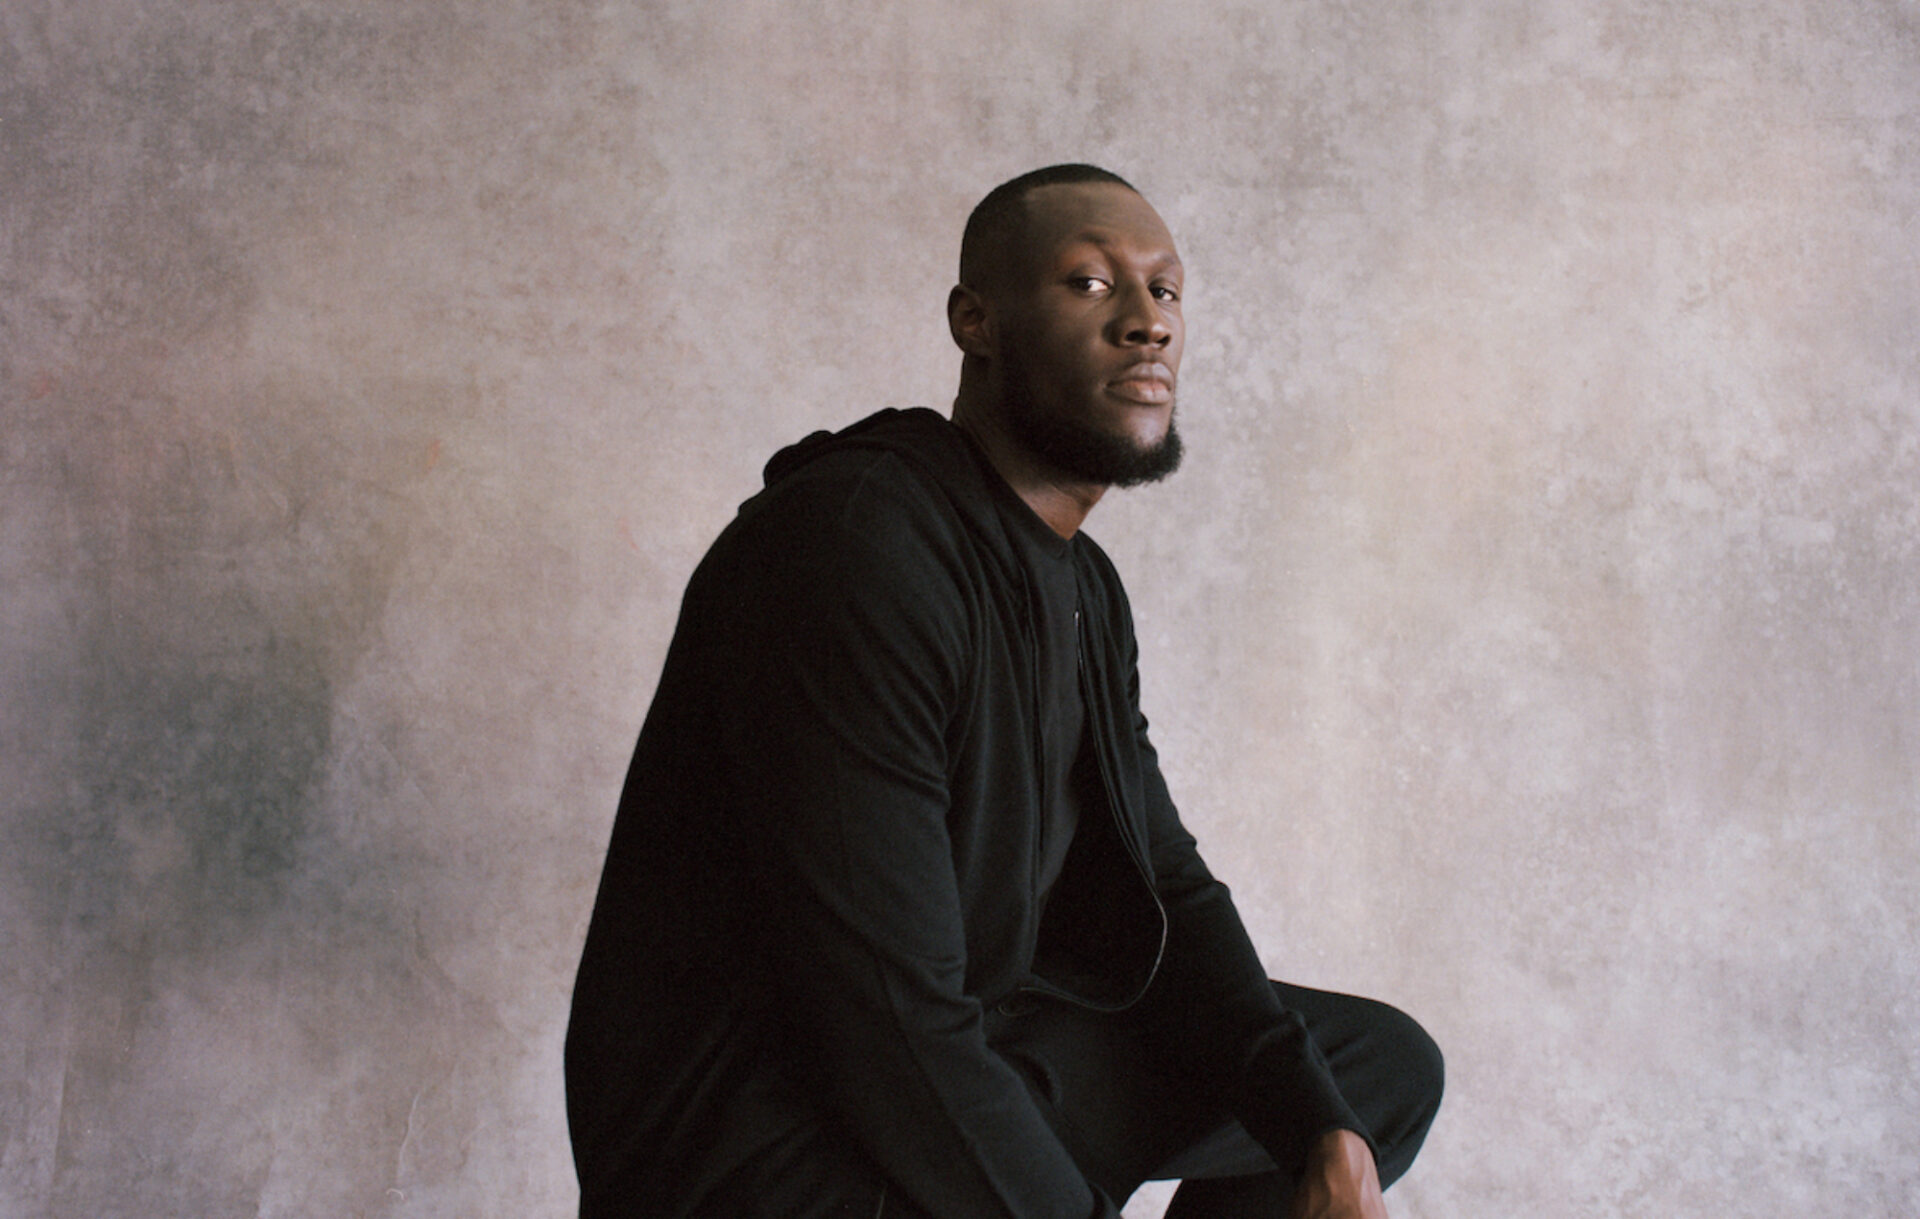 What is Stormzy's 'Hide & Seek' about?